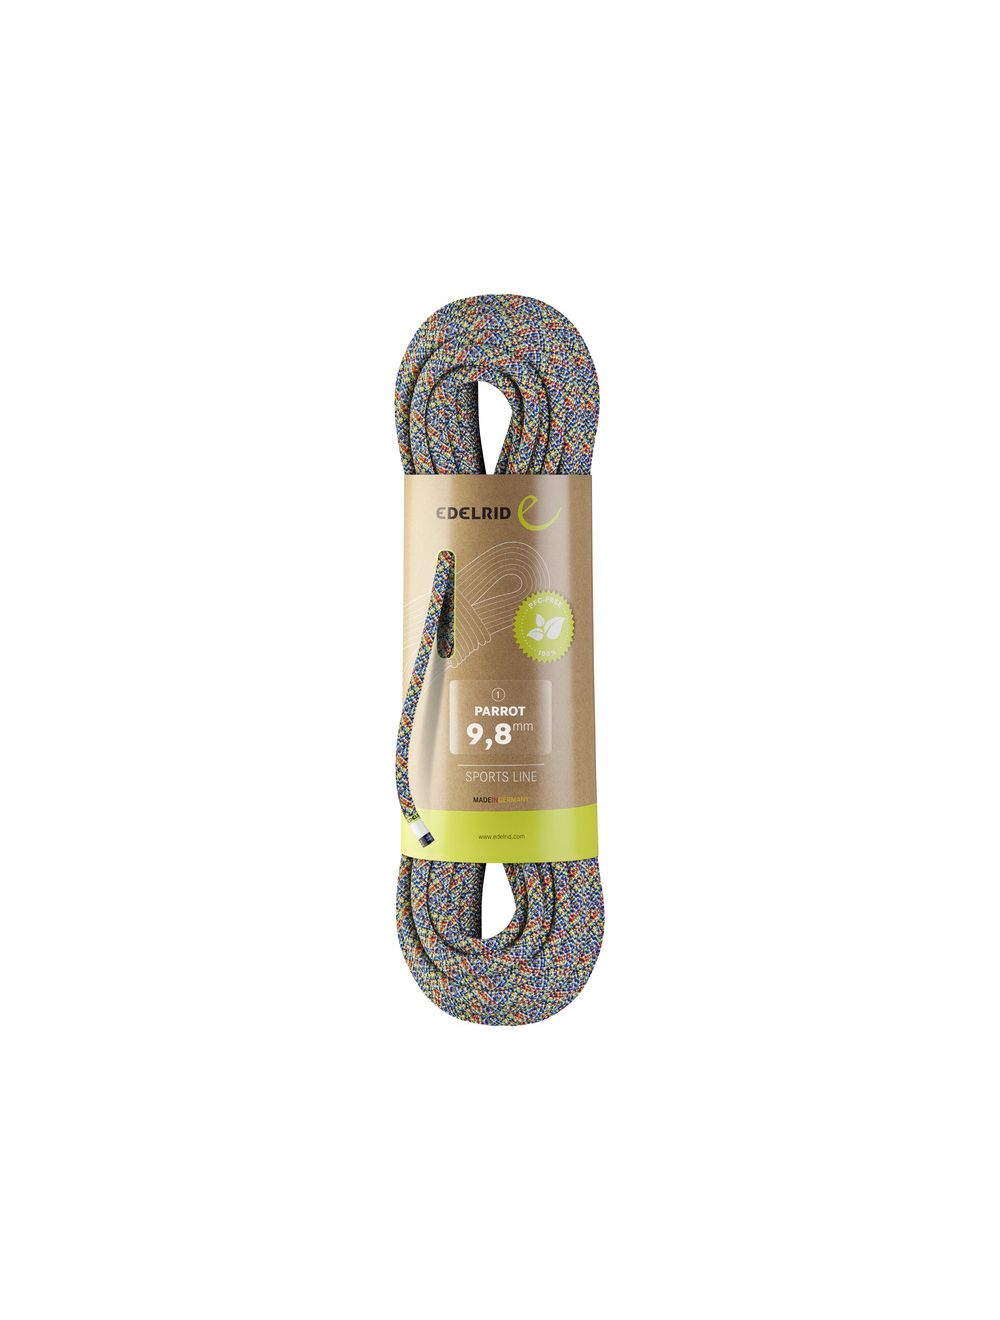 EDELRID Lina dynamiczna PARROT 9,8 mm x 60 m assorted colours